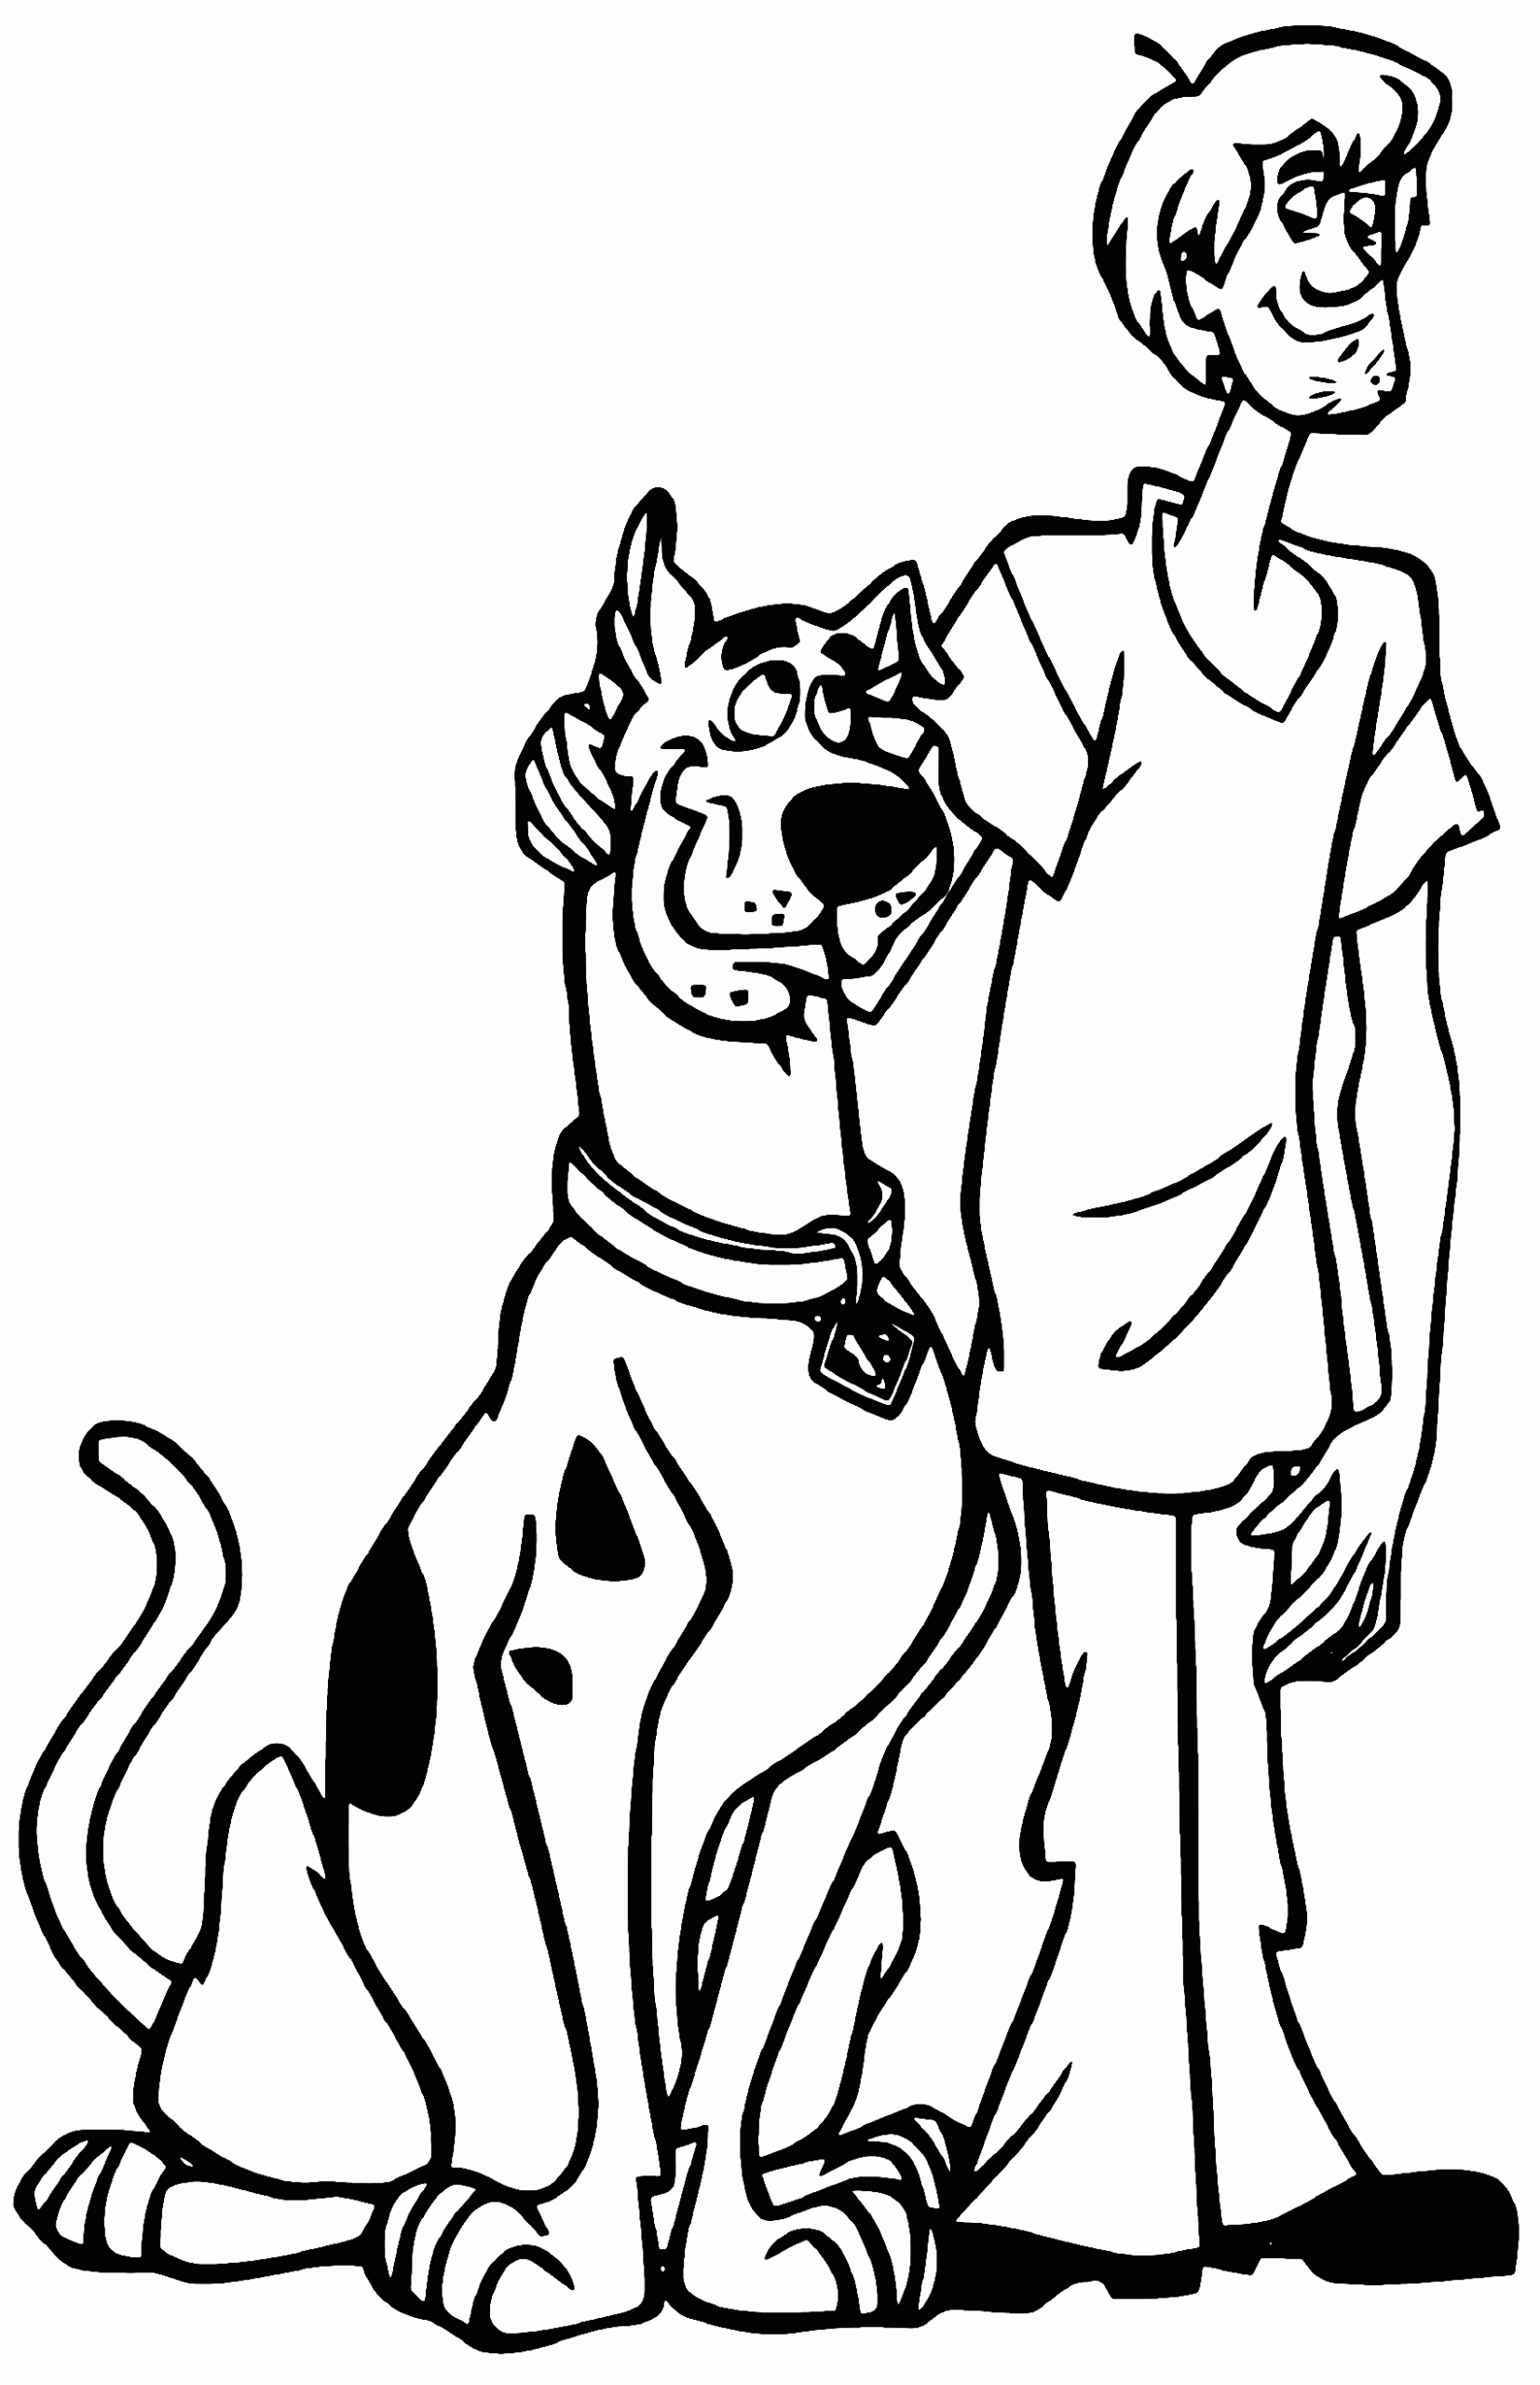 Scooby Doo and Shaggy Coloring Page